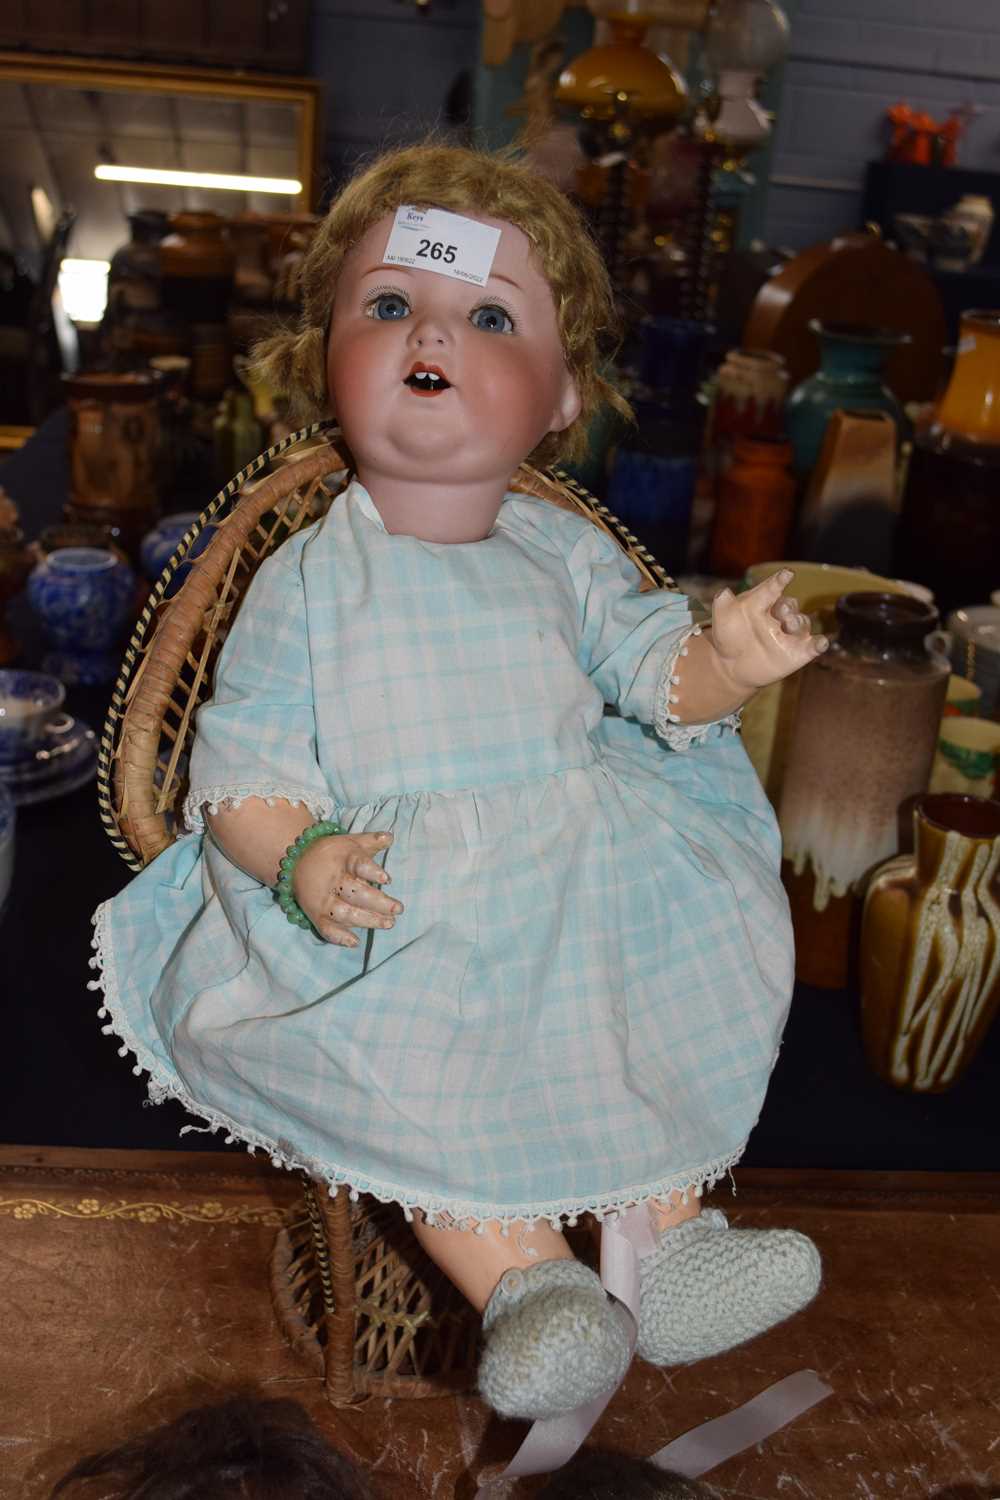 Late 19th/early 20th century doll with bisque porcelain head, marked Armand Marseille A8M